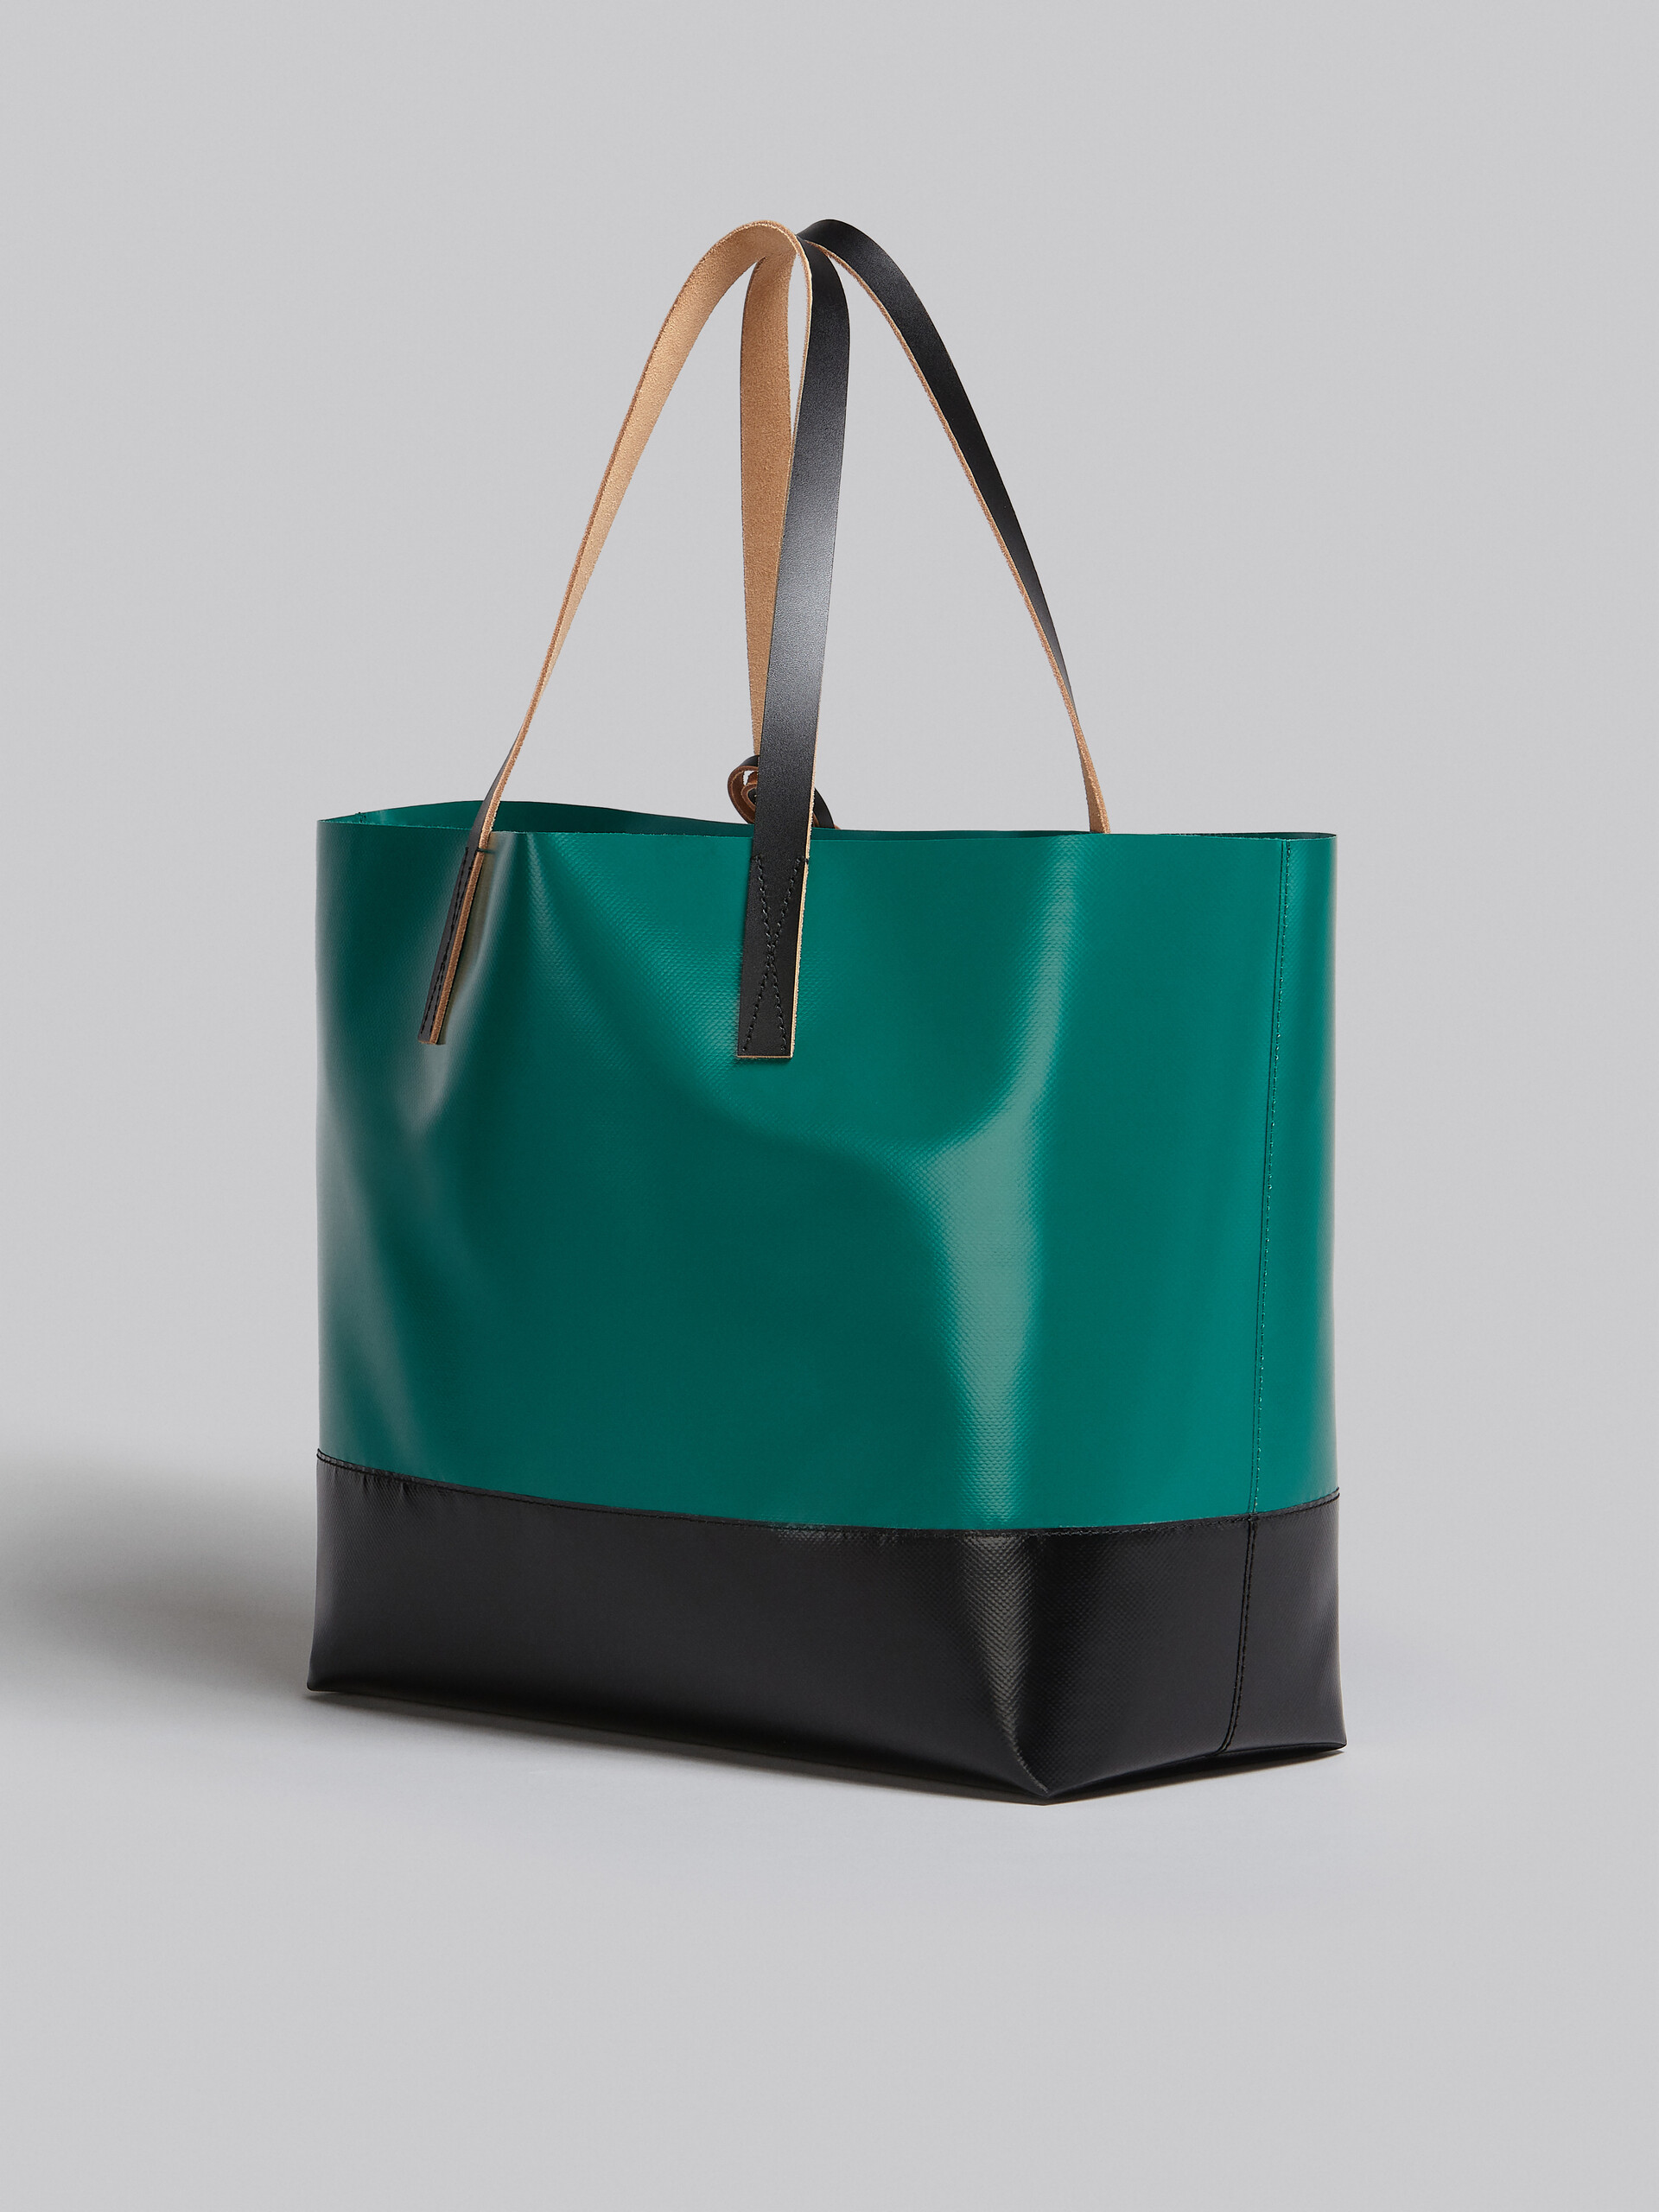 Tribeca shopping bag in green and black - Shopping Bags - Image 3